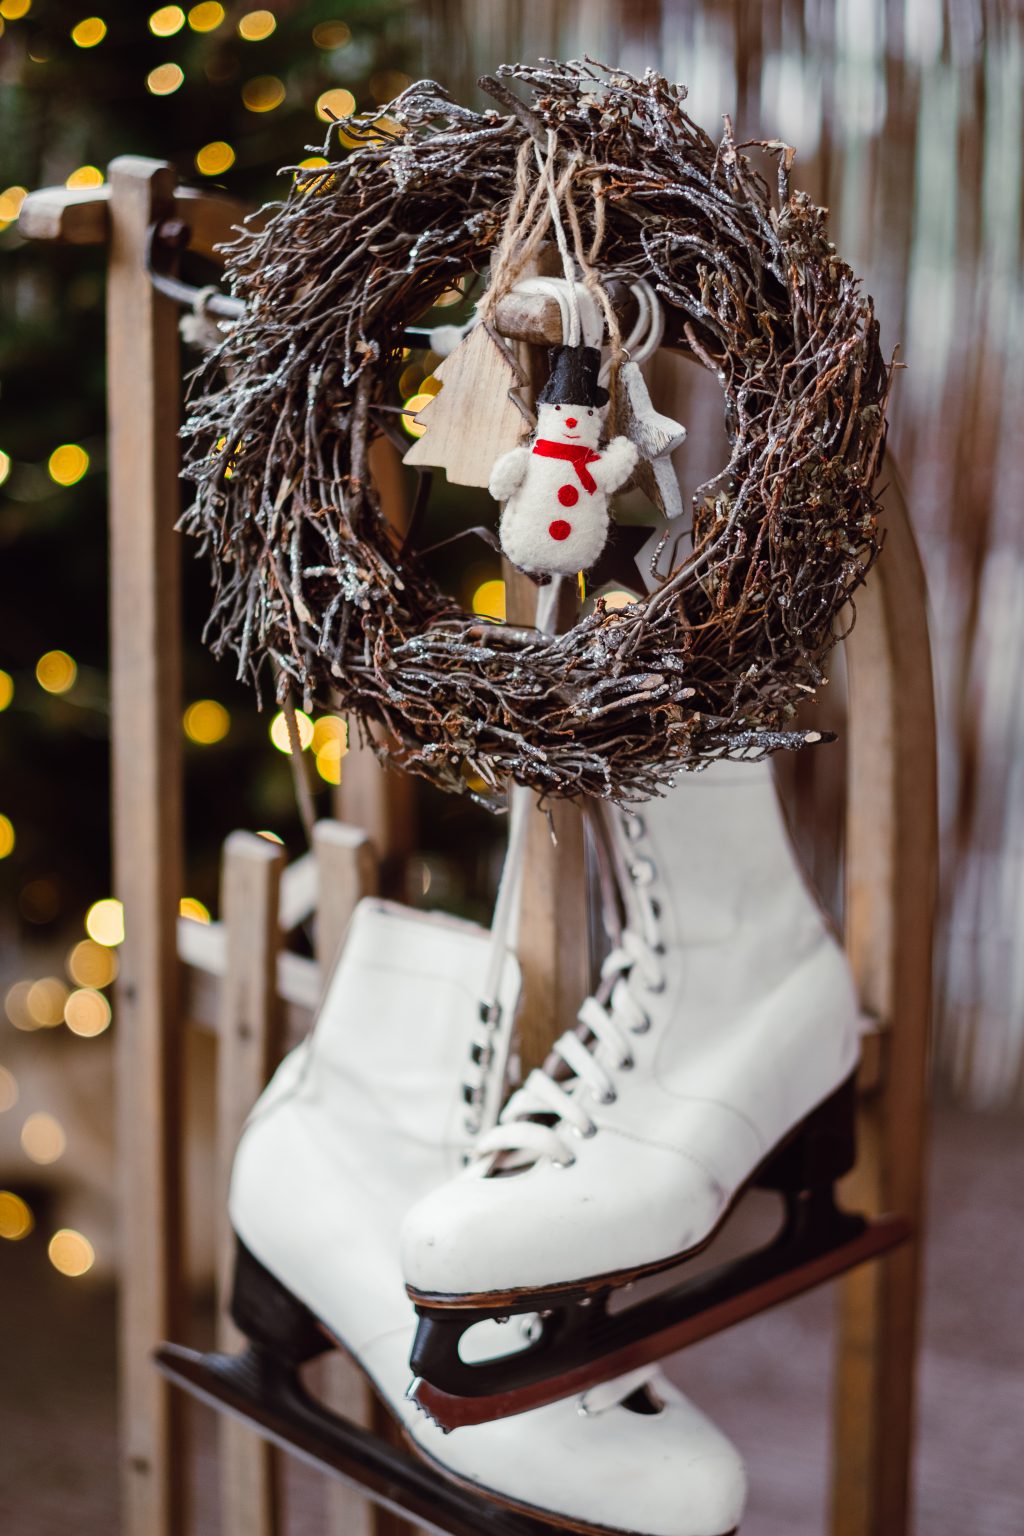 Christmas wreath and vintage ice skates on a wooden sled 6 - free stock photo